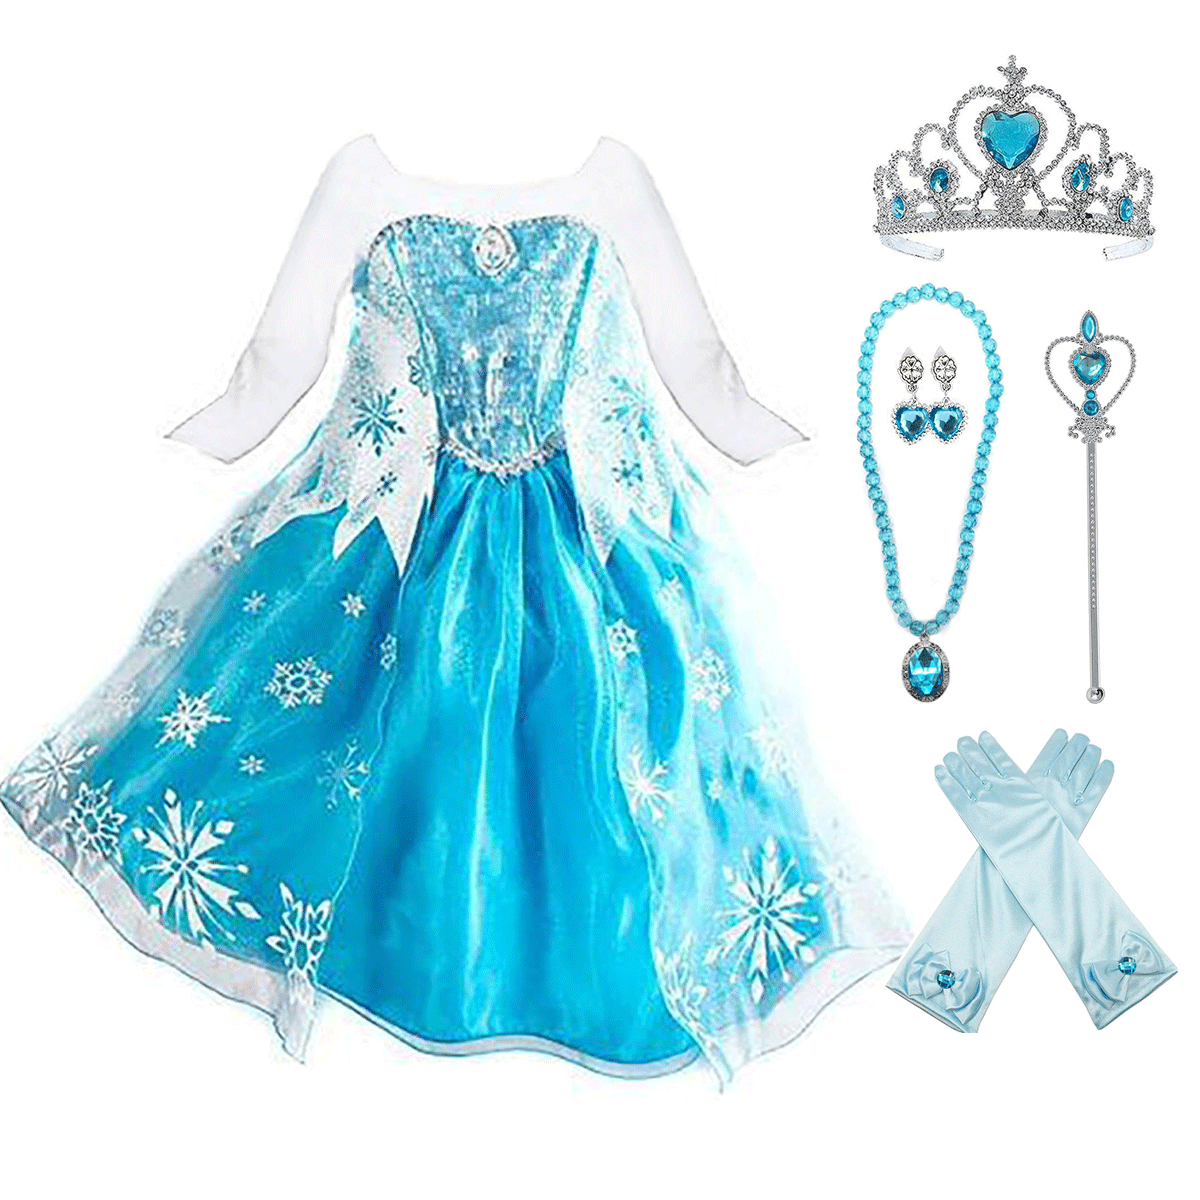 Frozen Dress - Quality products with free shipping | only on AliExpress